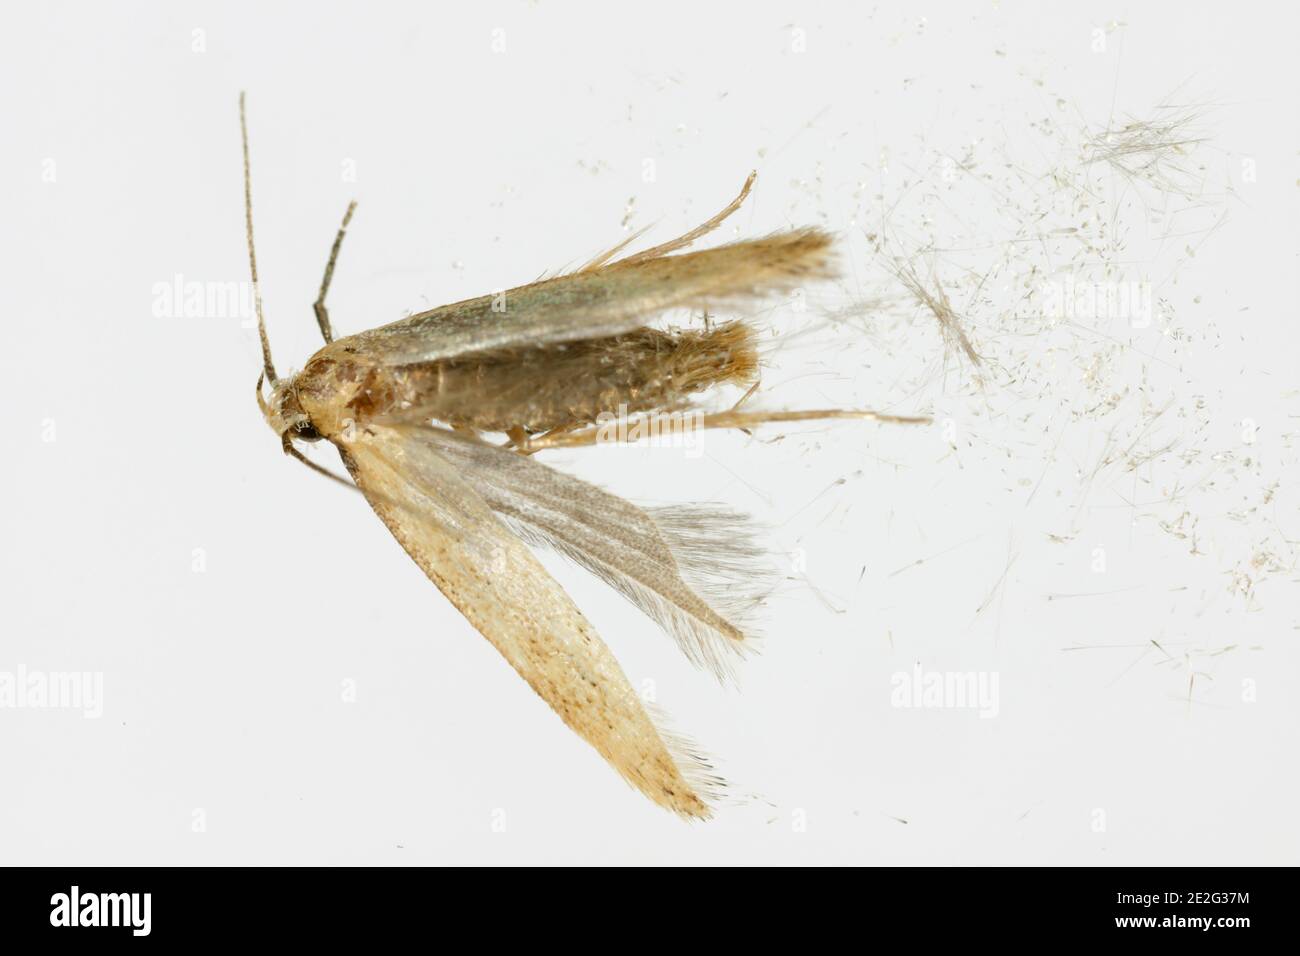 Dead moth of the Angoumois grain moth (Sitotroga cerealella). It is an important pest of stored grains of cereals, maize, rice and others. Stock Photo